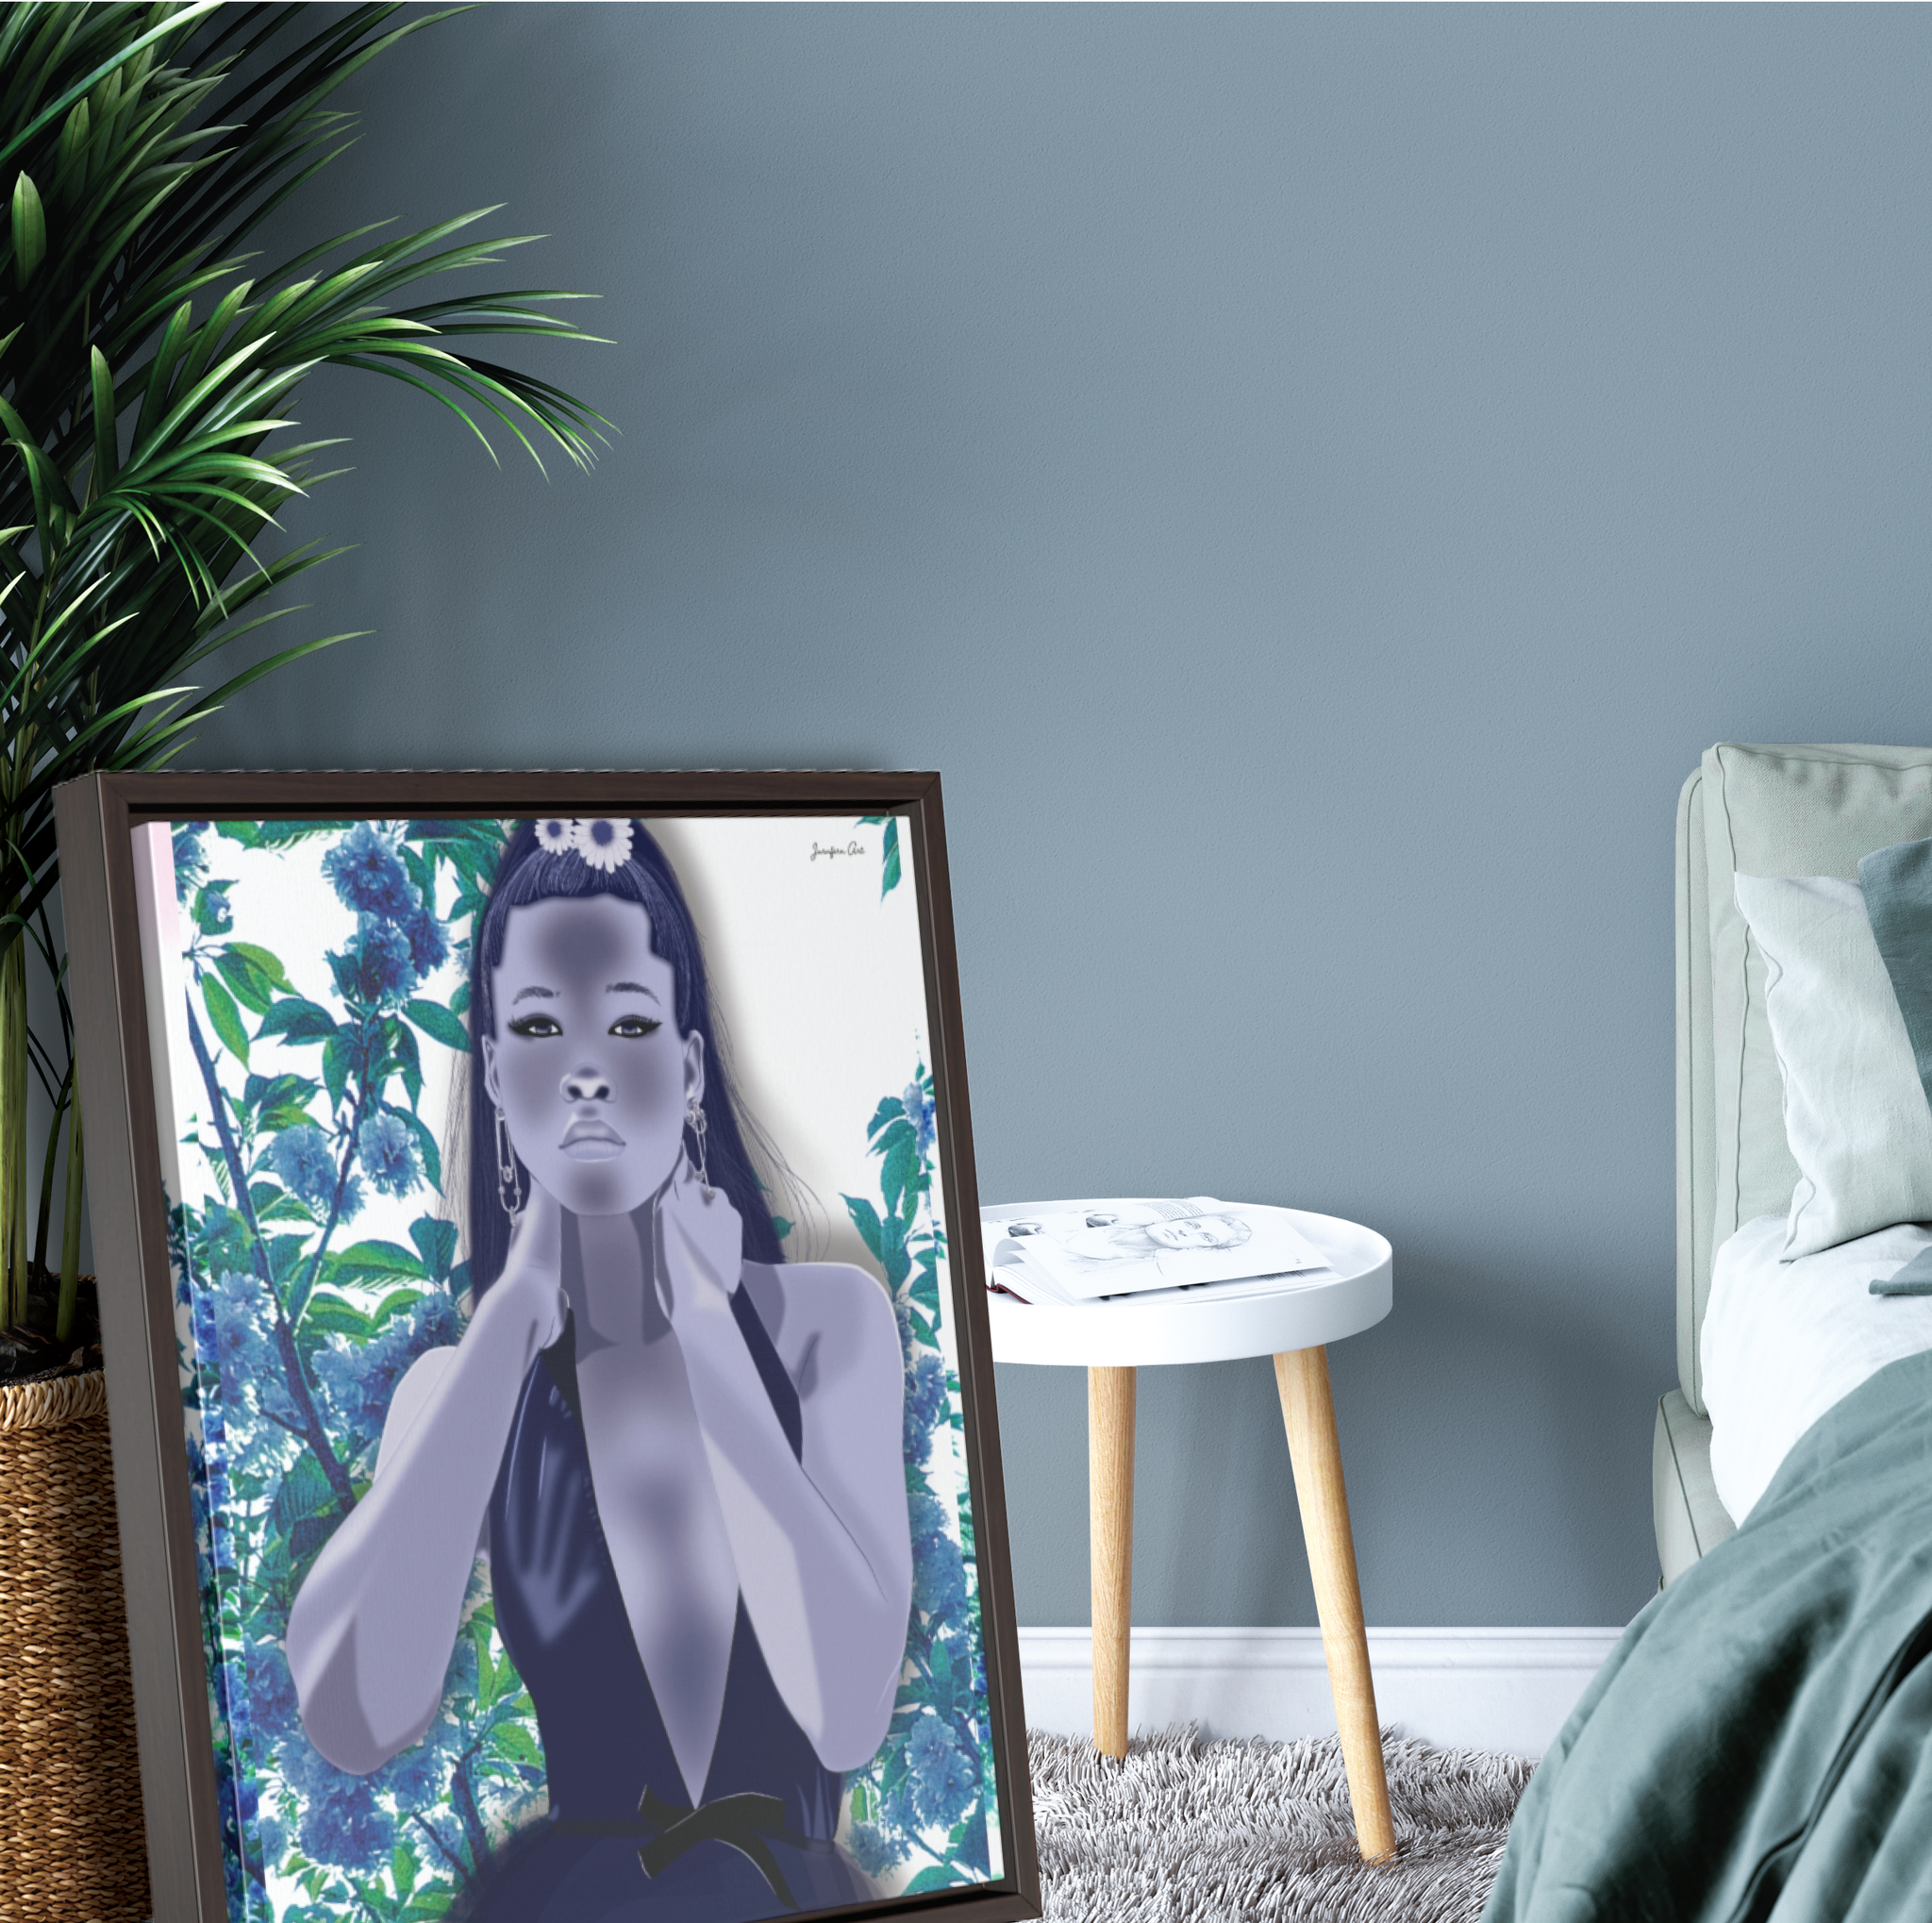 A large framed canvas illustration of actress Storm Reid posing in a blue deep-neck dress, with a blue floral background. The canvas is leaning up against a potted plant next to a bed